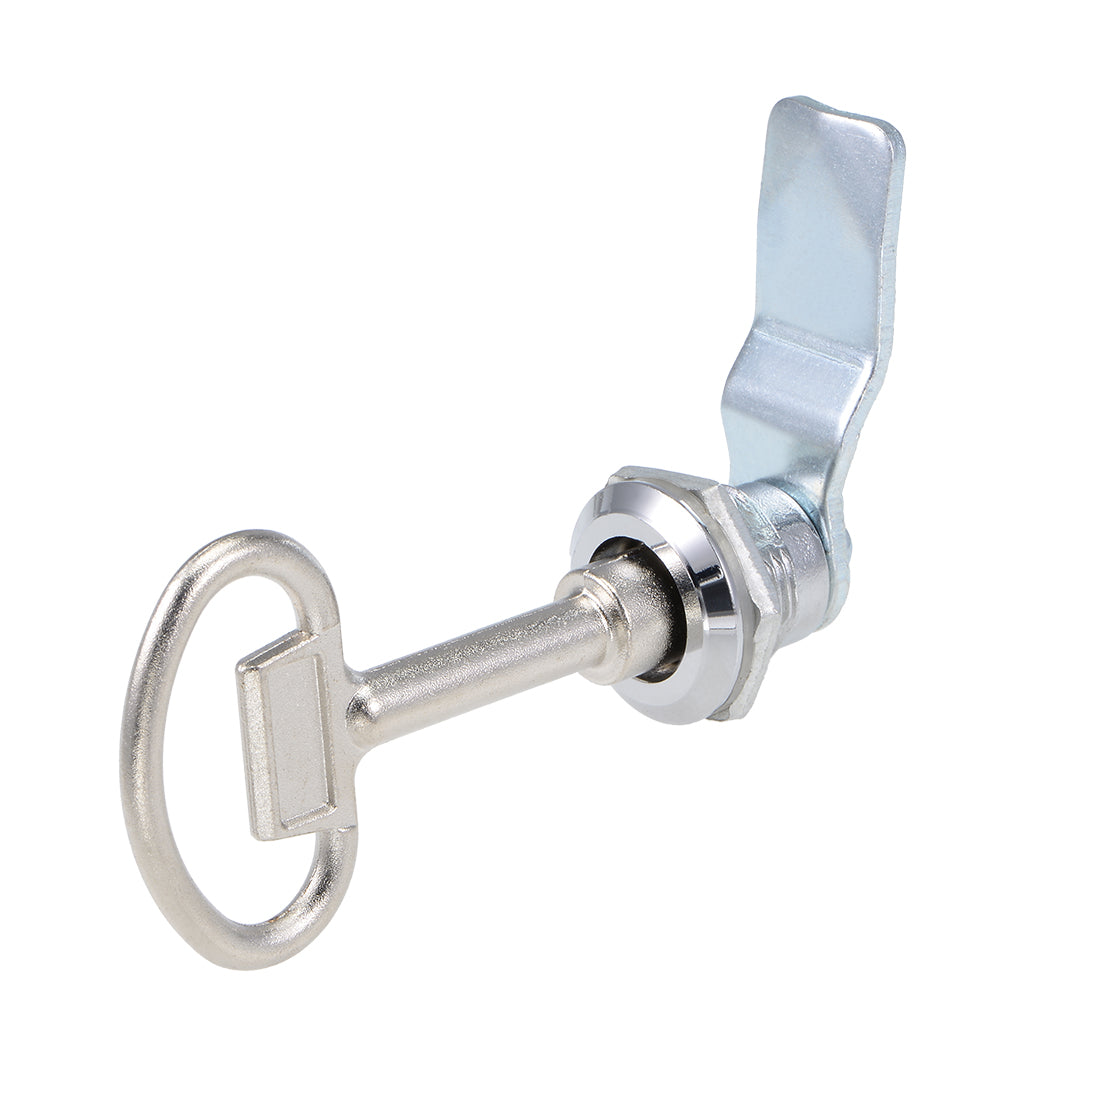 uxcell Uxcell Tubular Cam Lock 22mm Cylinder Dia 52mm Long Cam Triangle Key